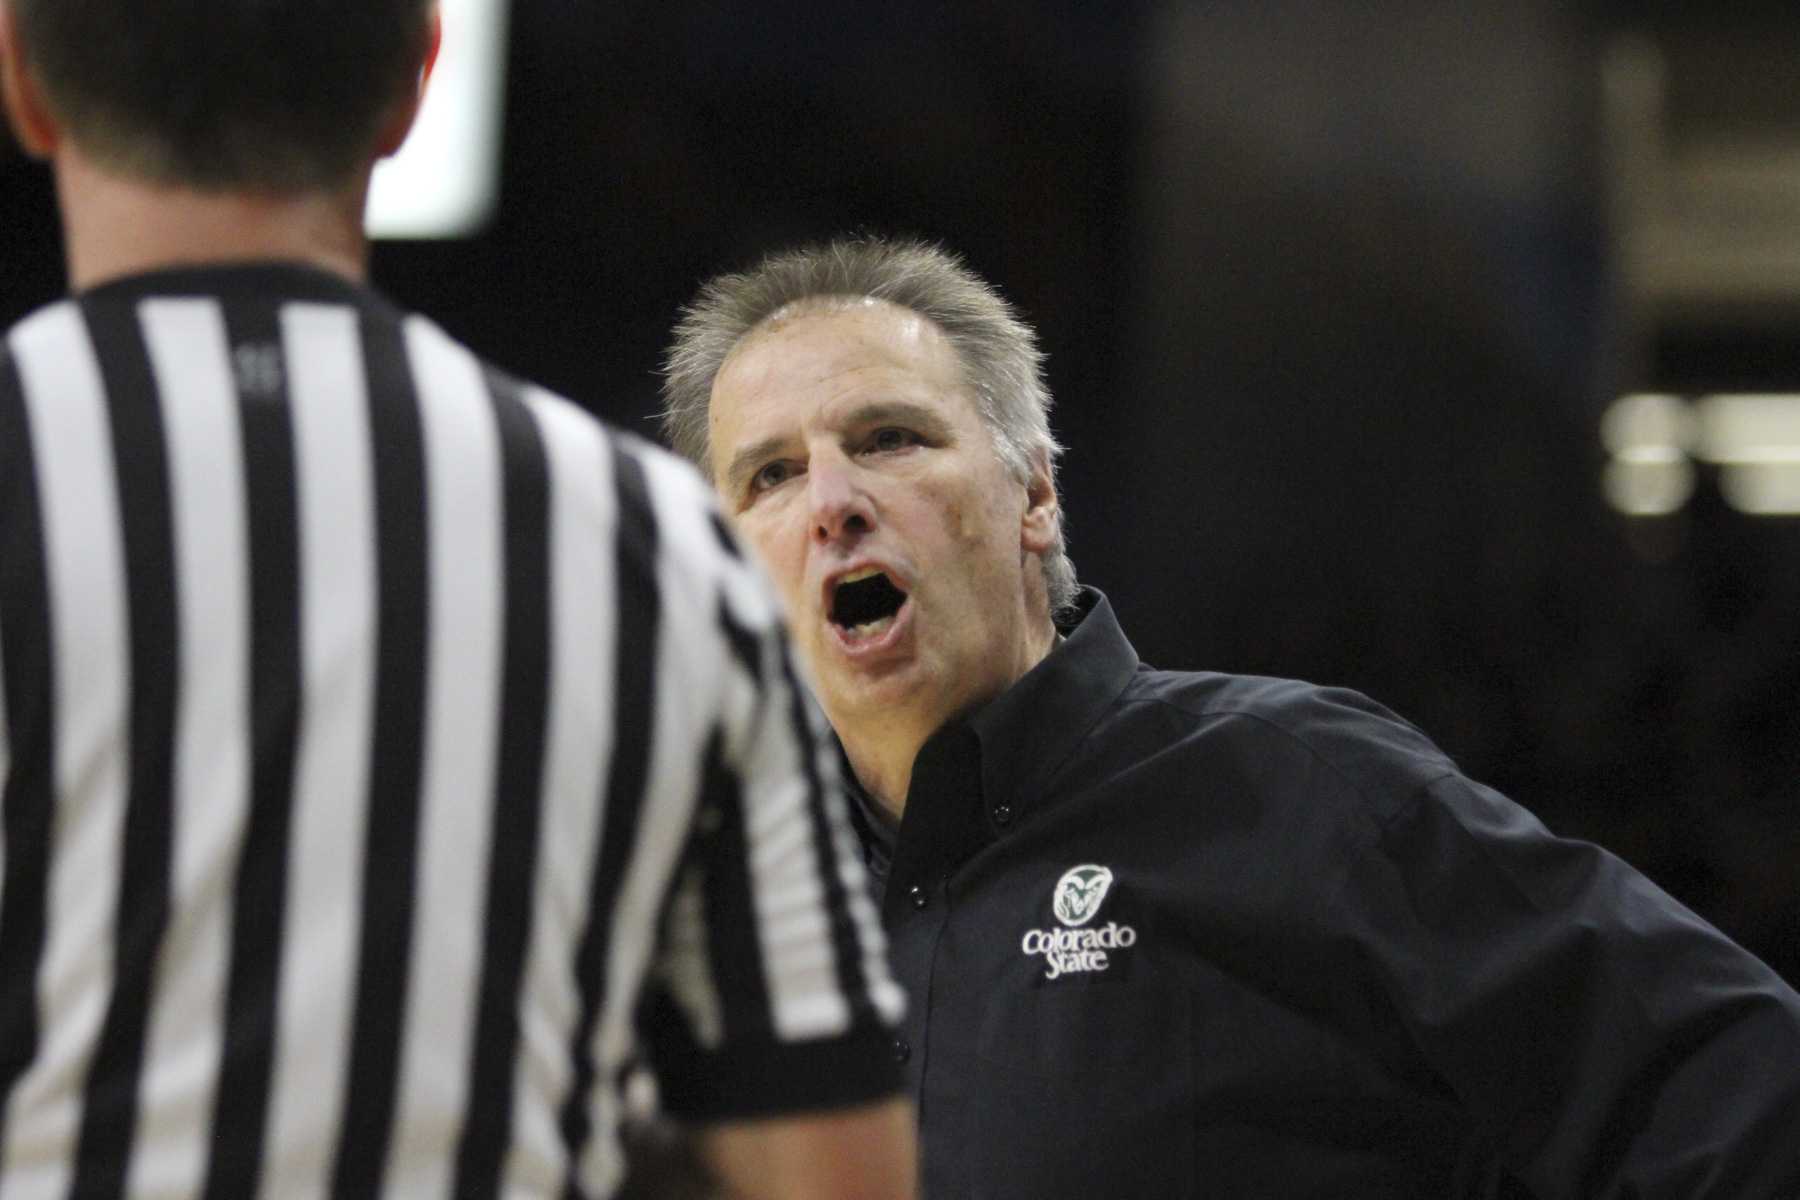 Larry Eustachy yells at a referee.